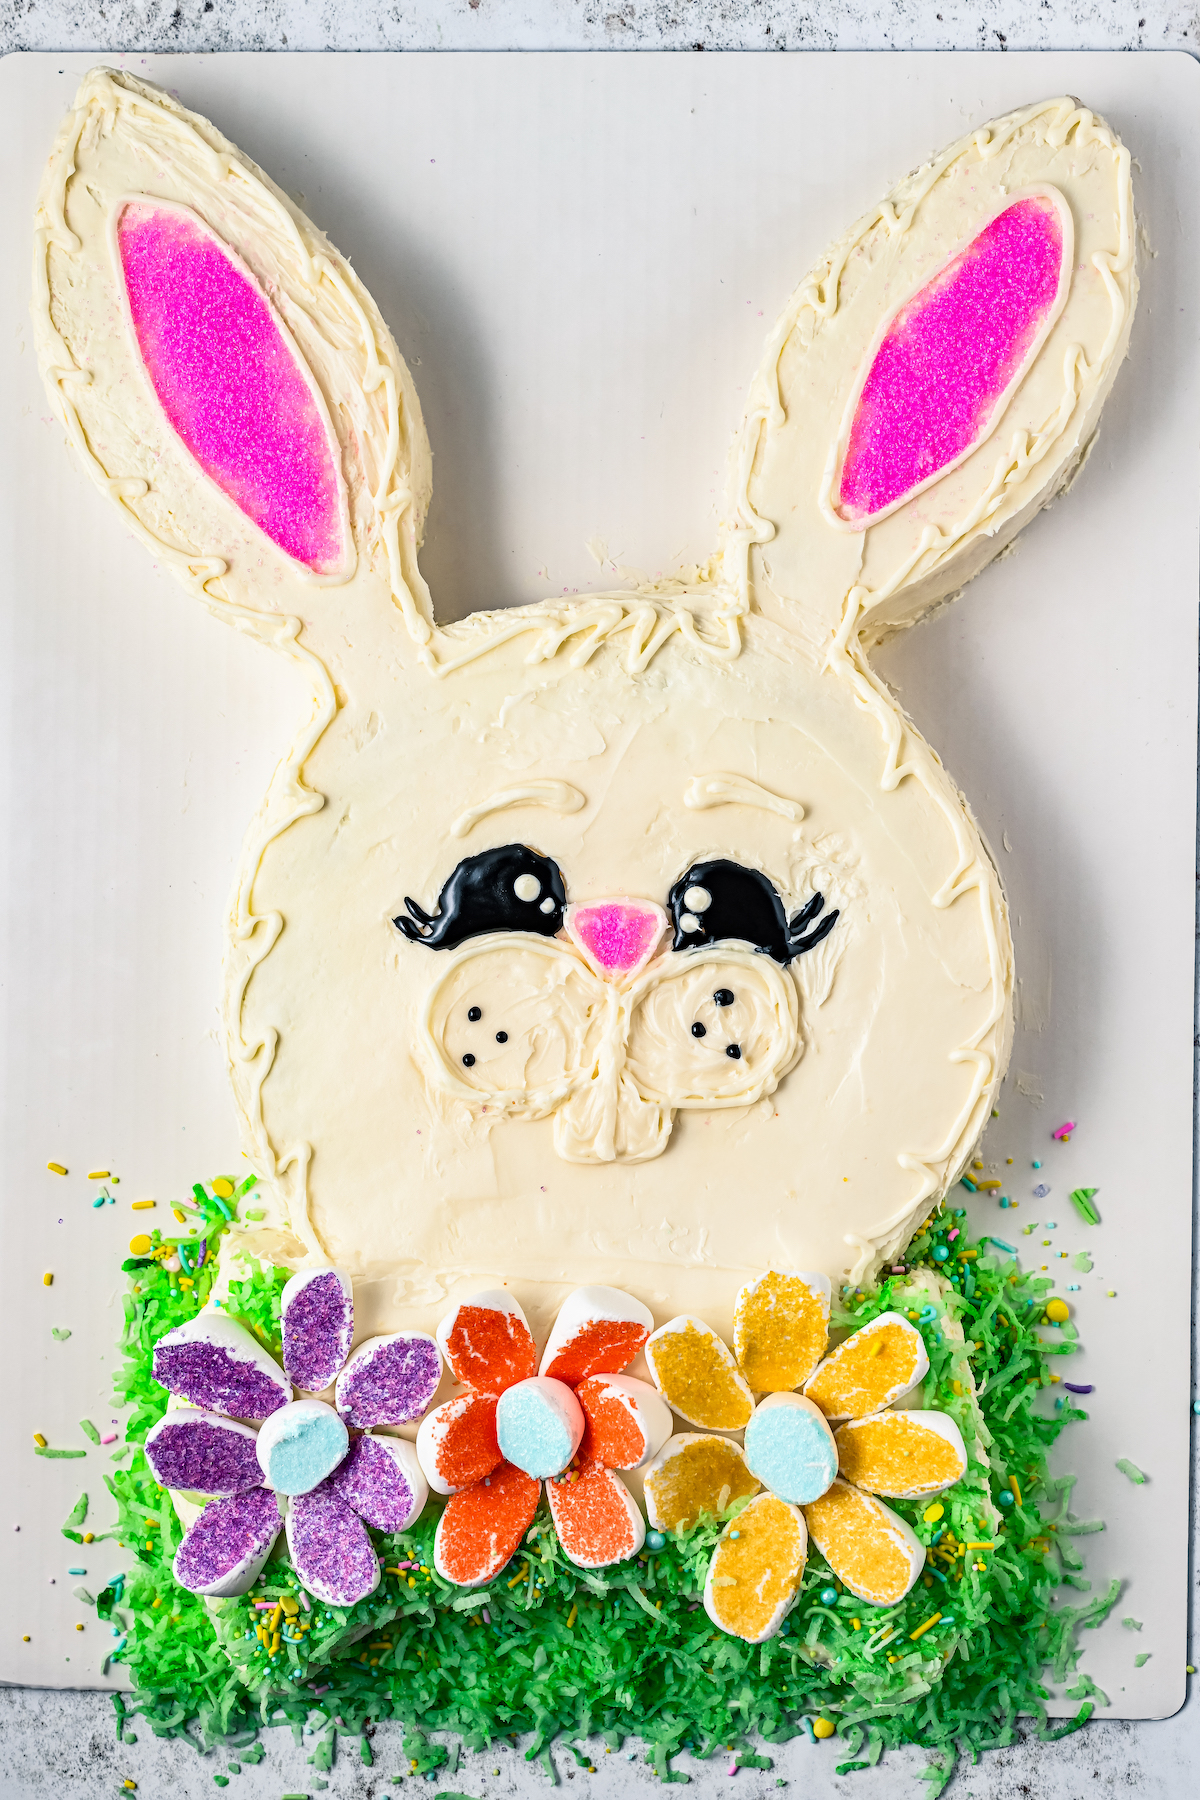 A cake shaped like a bunny, decorated with flowers and coconut grass.